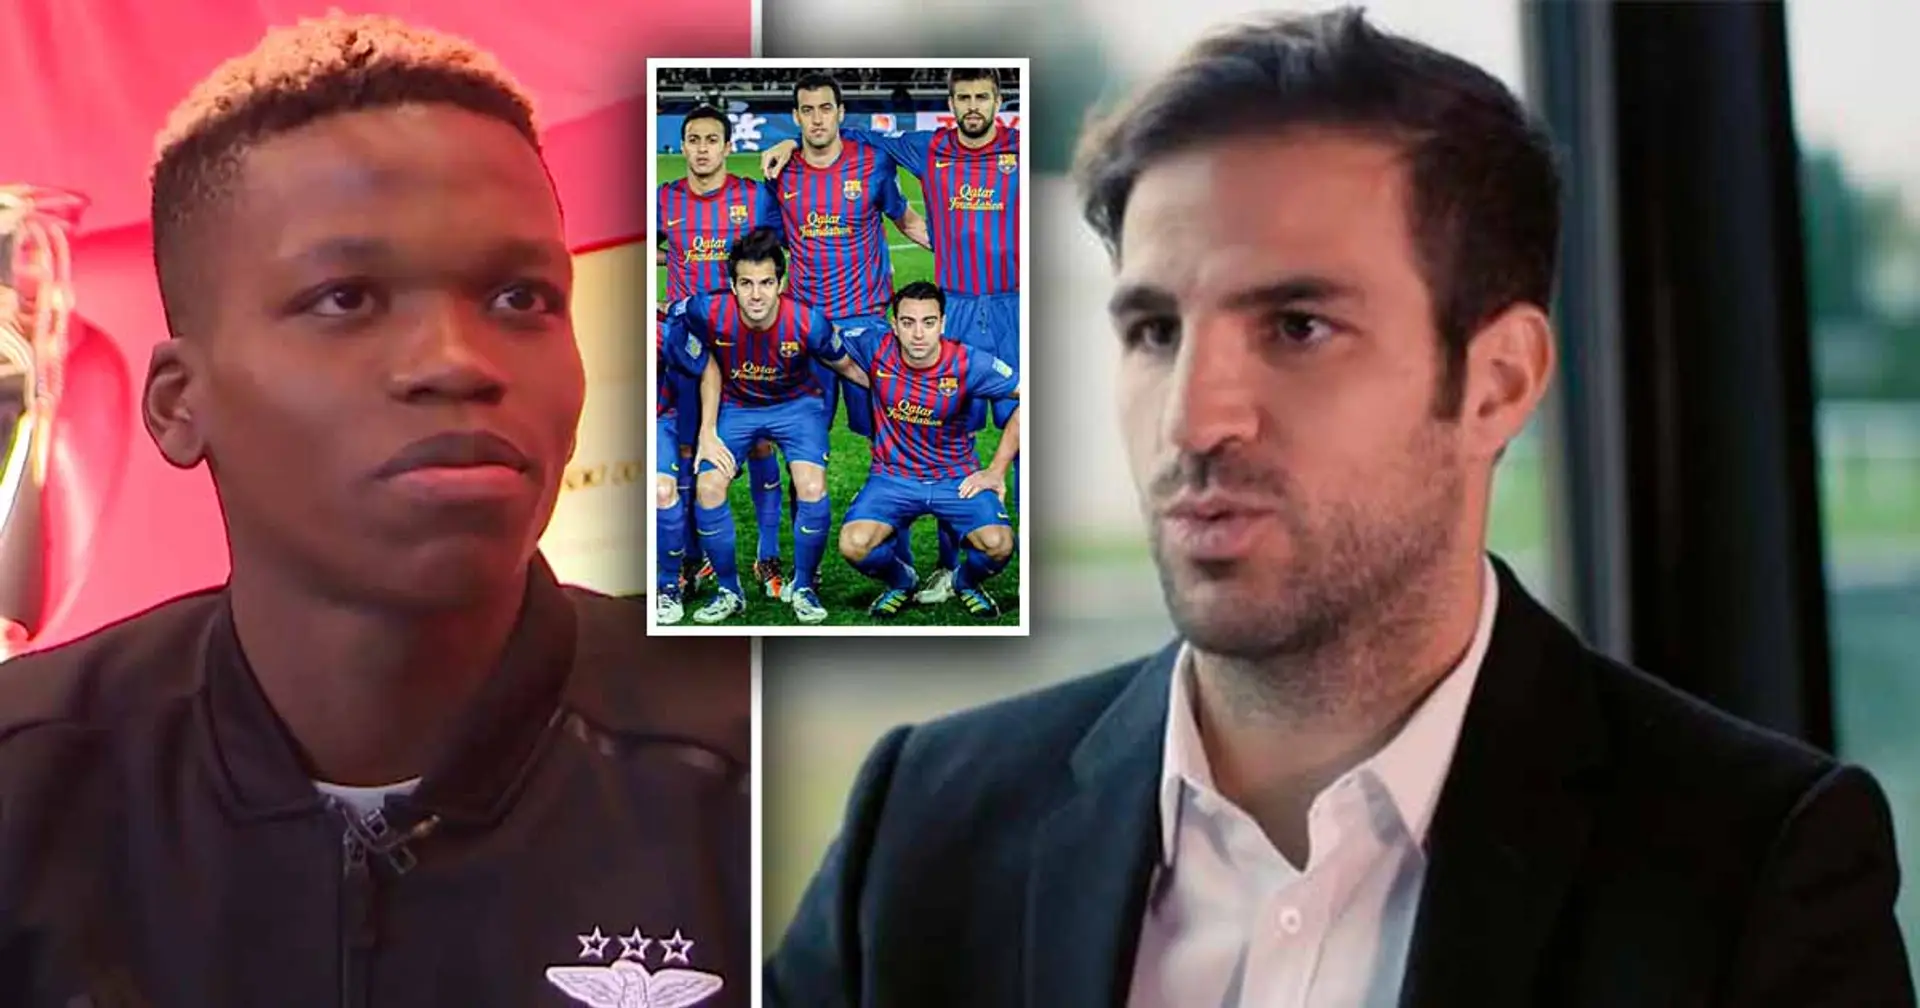 Portuguese talent reveals Fabregas made him special surprise – jersey signed by Barca legend